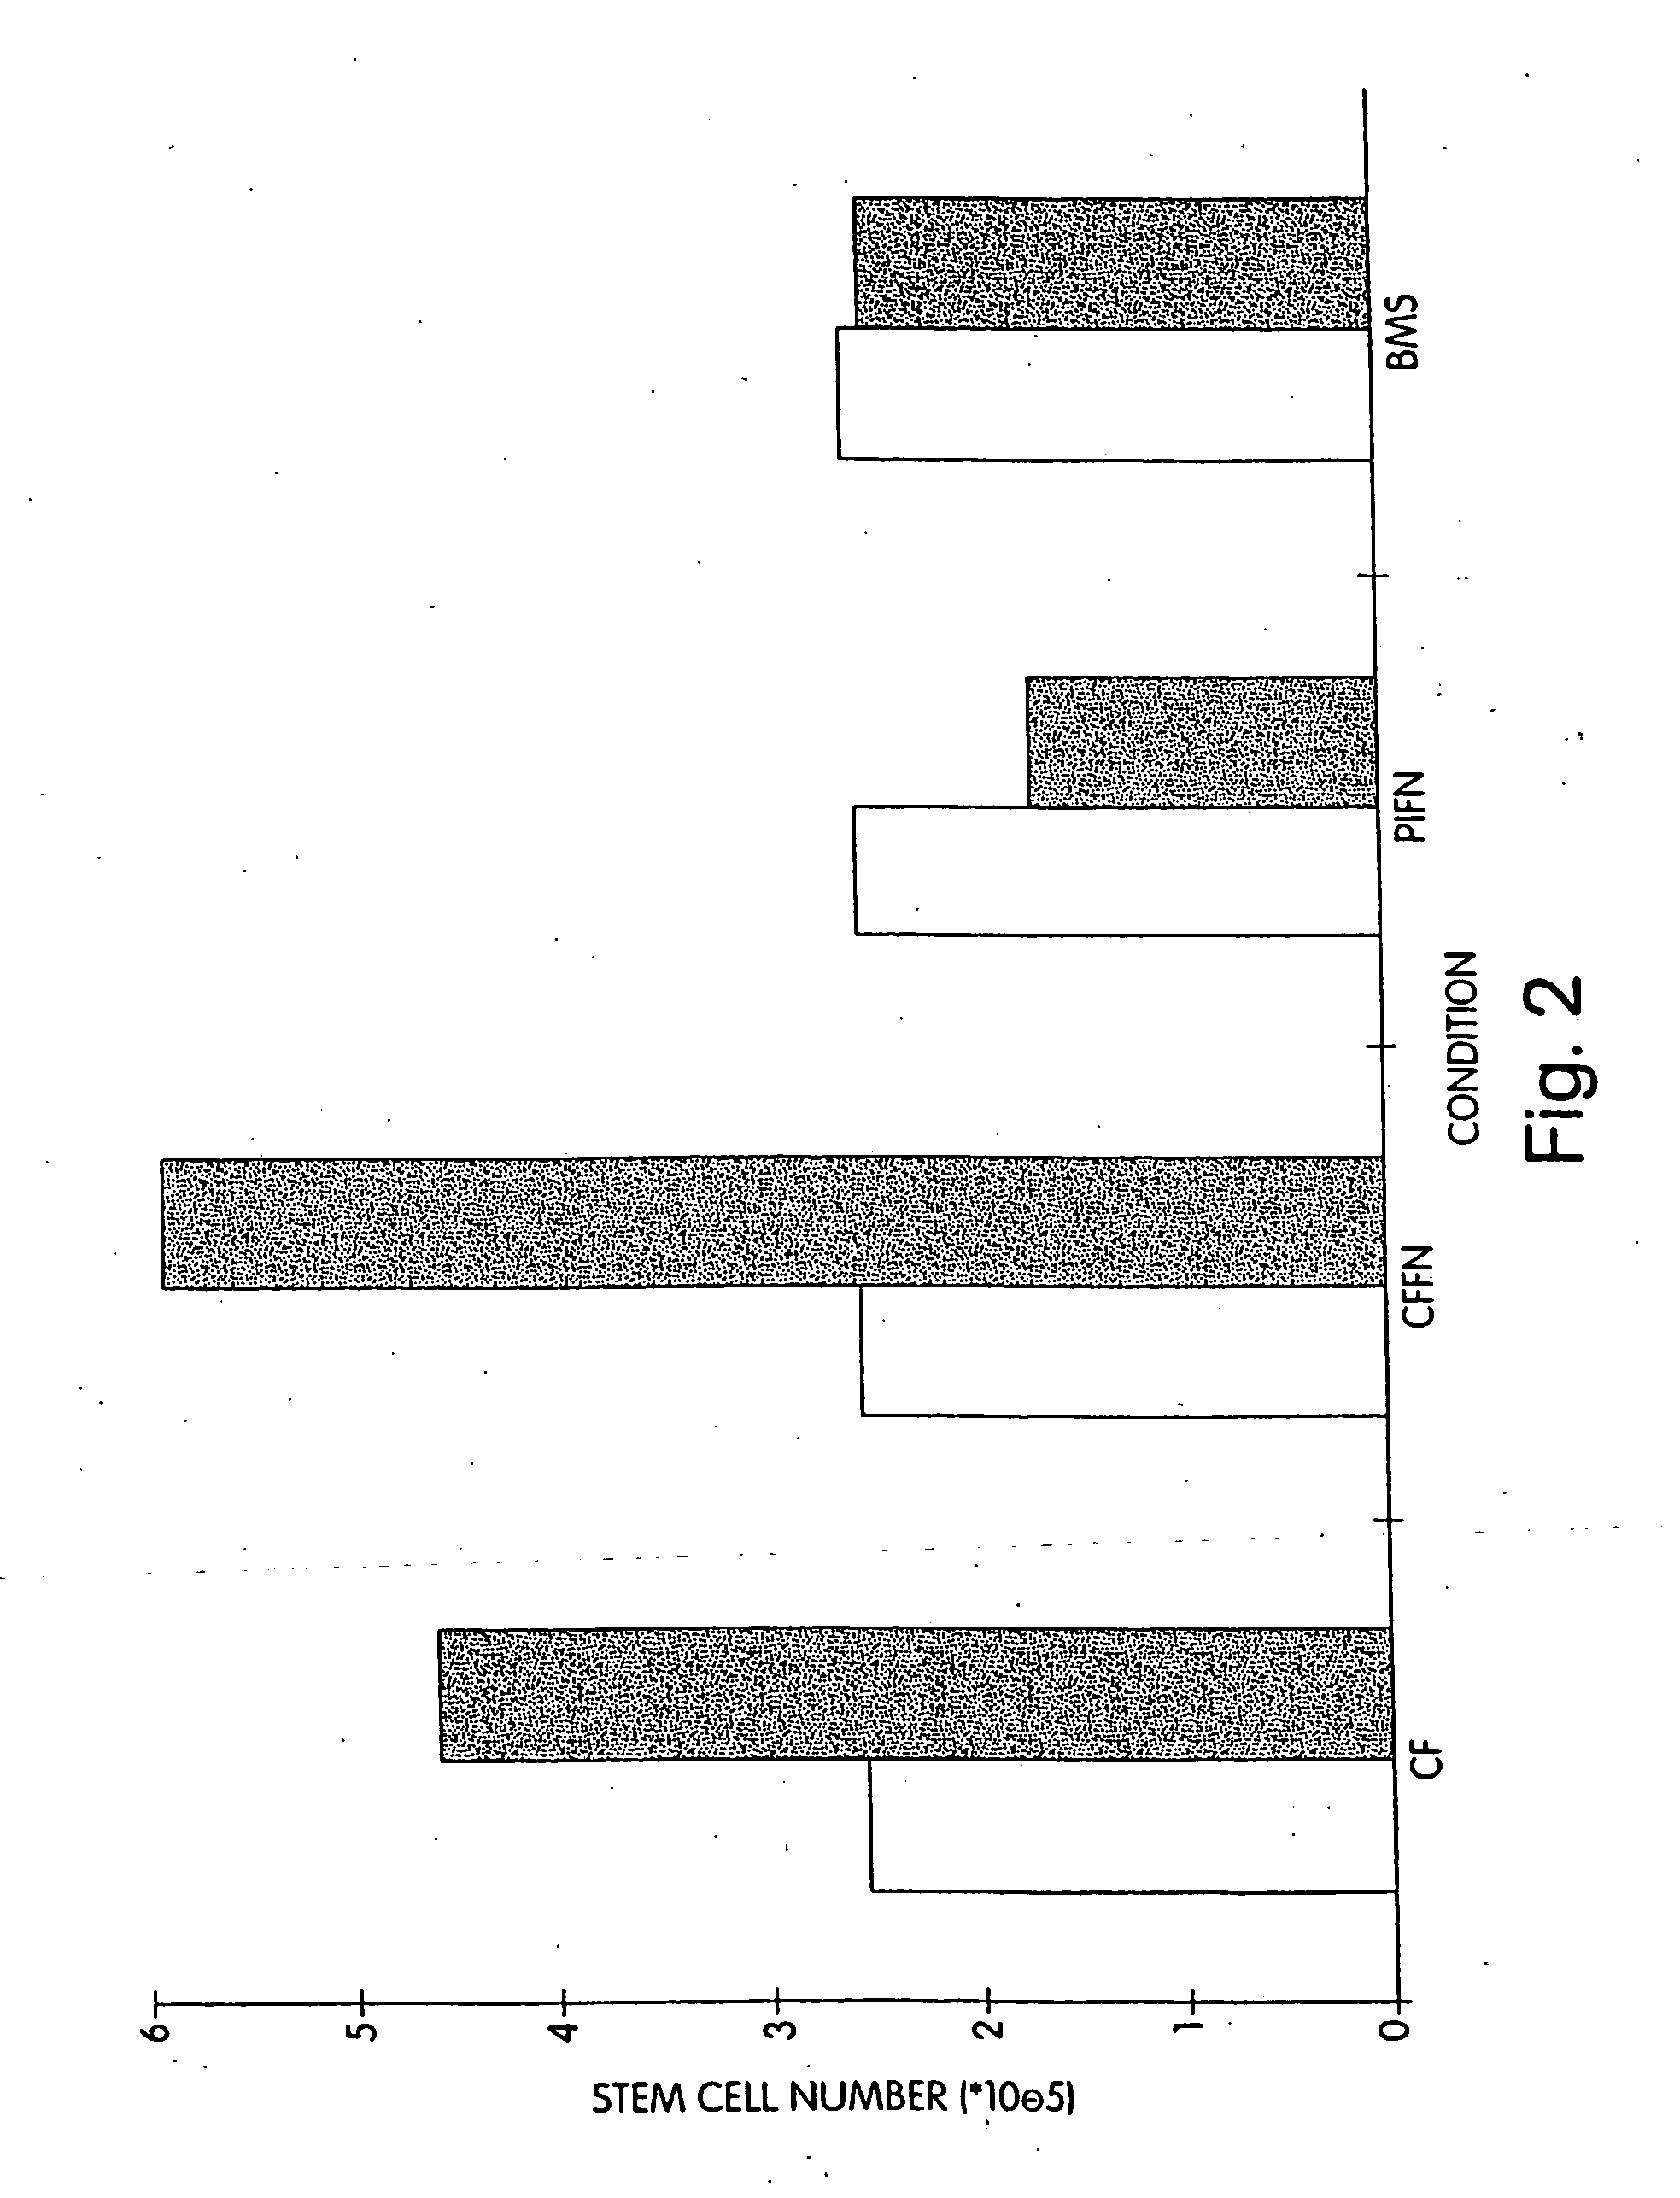 Methods and devices for the long-term culture of hematopoietic progenitor cells